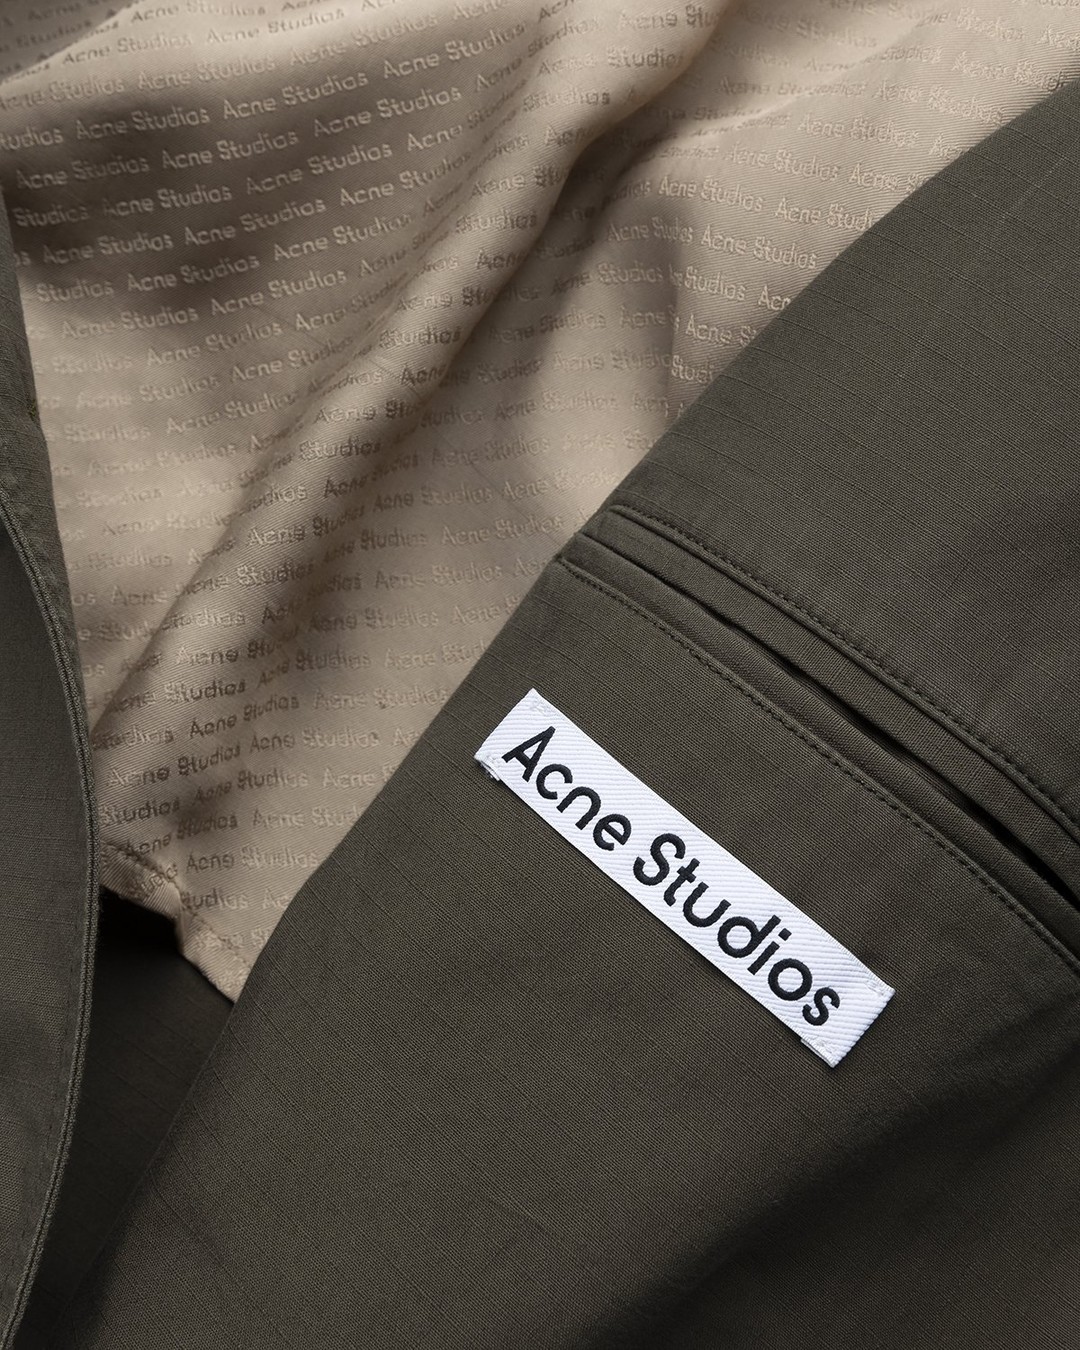 Acne Studios – Trench Coat Dark Olive - Outerwear - Green - Image 6